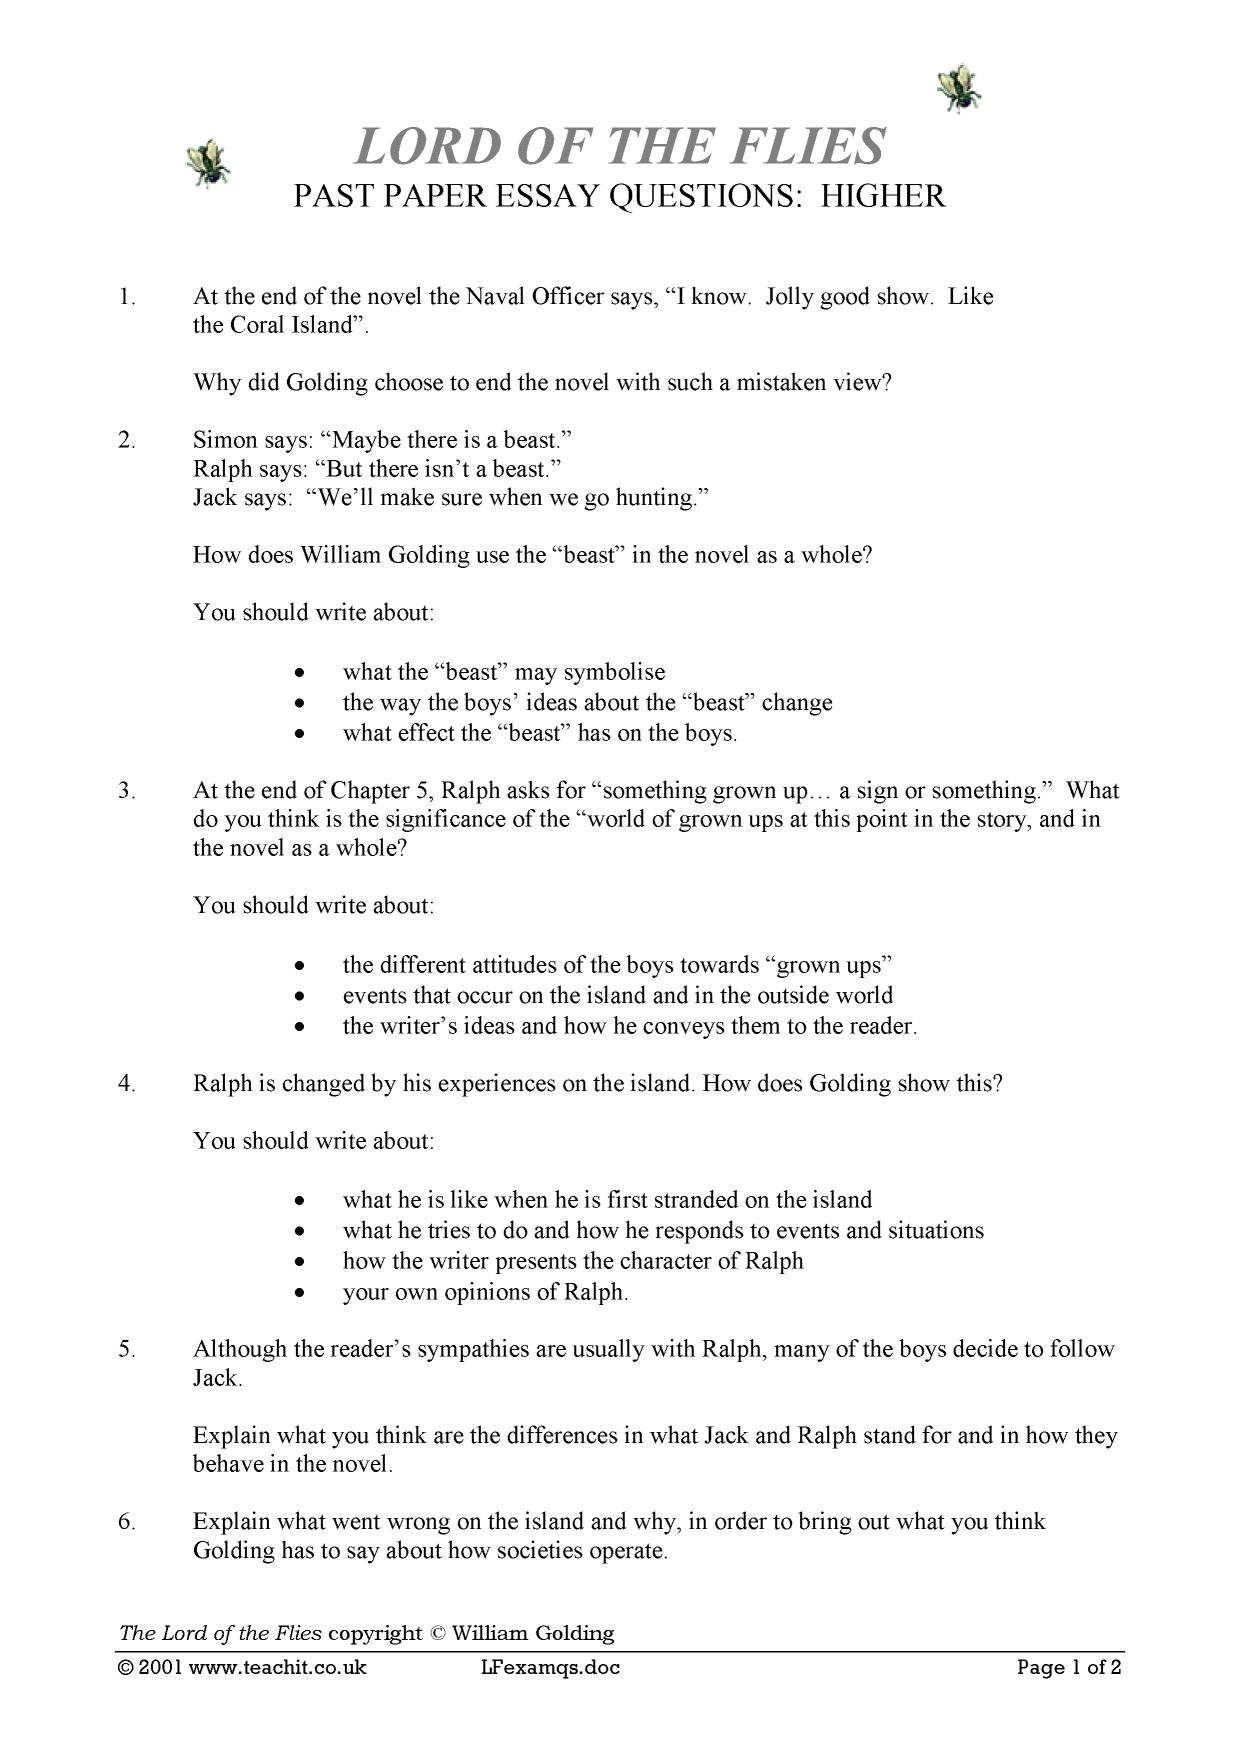 Lord of the flies practice essay questions